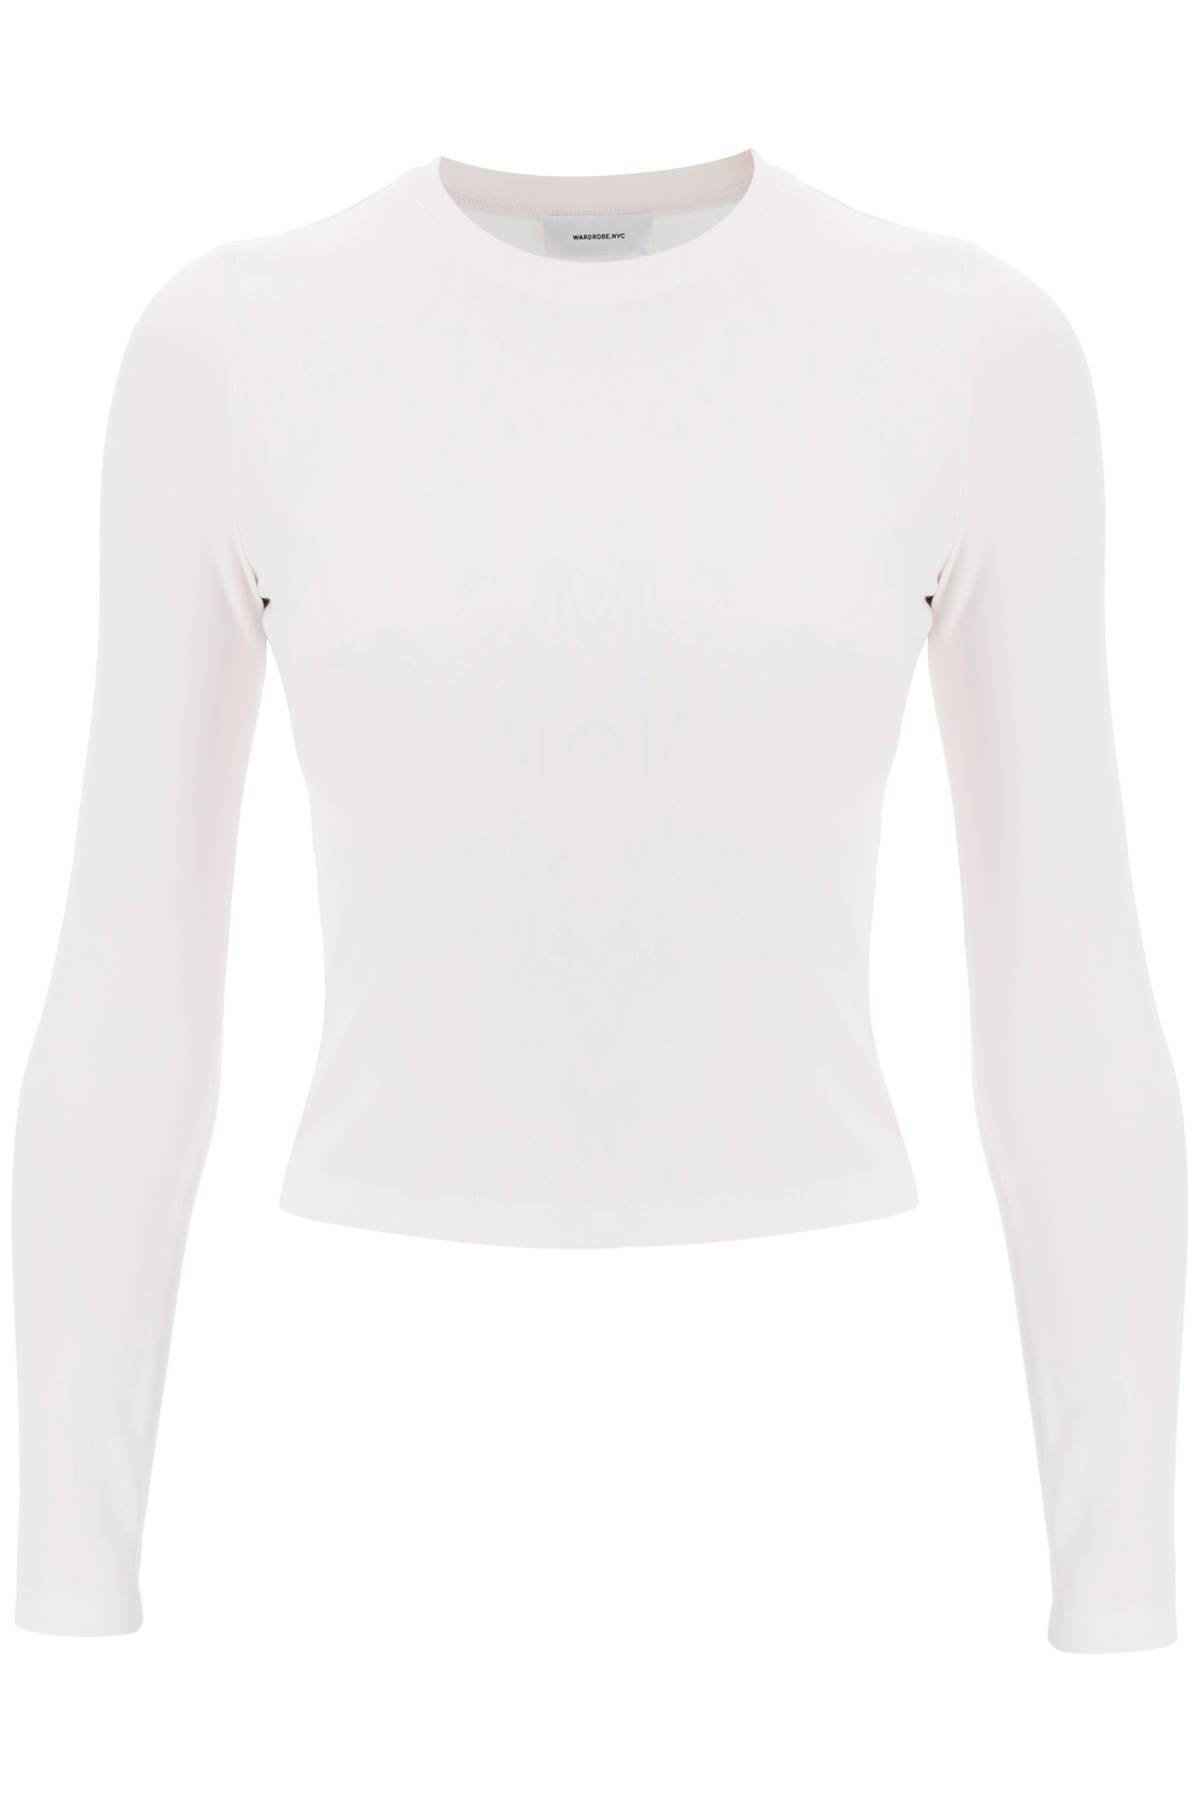 Shop Wardrobe.nyc Long-sleeved T-shirt In White